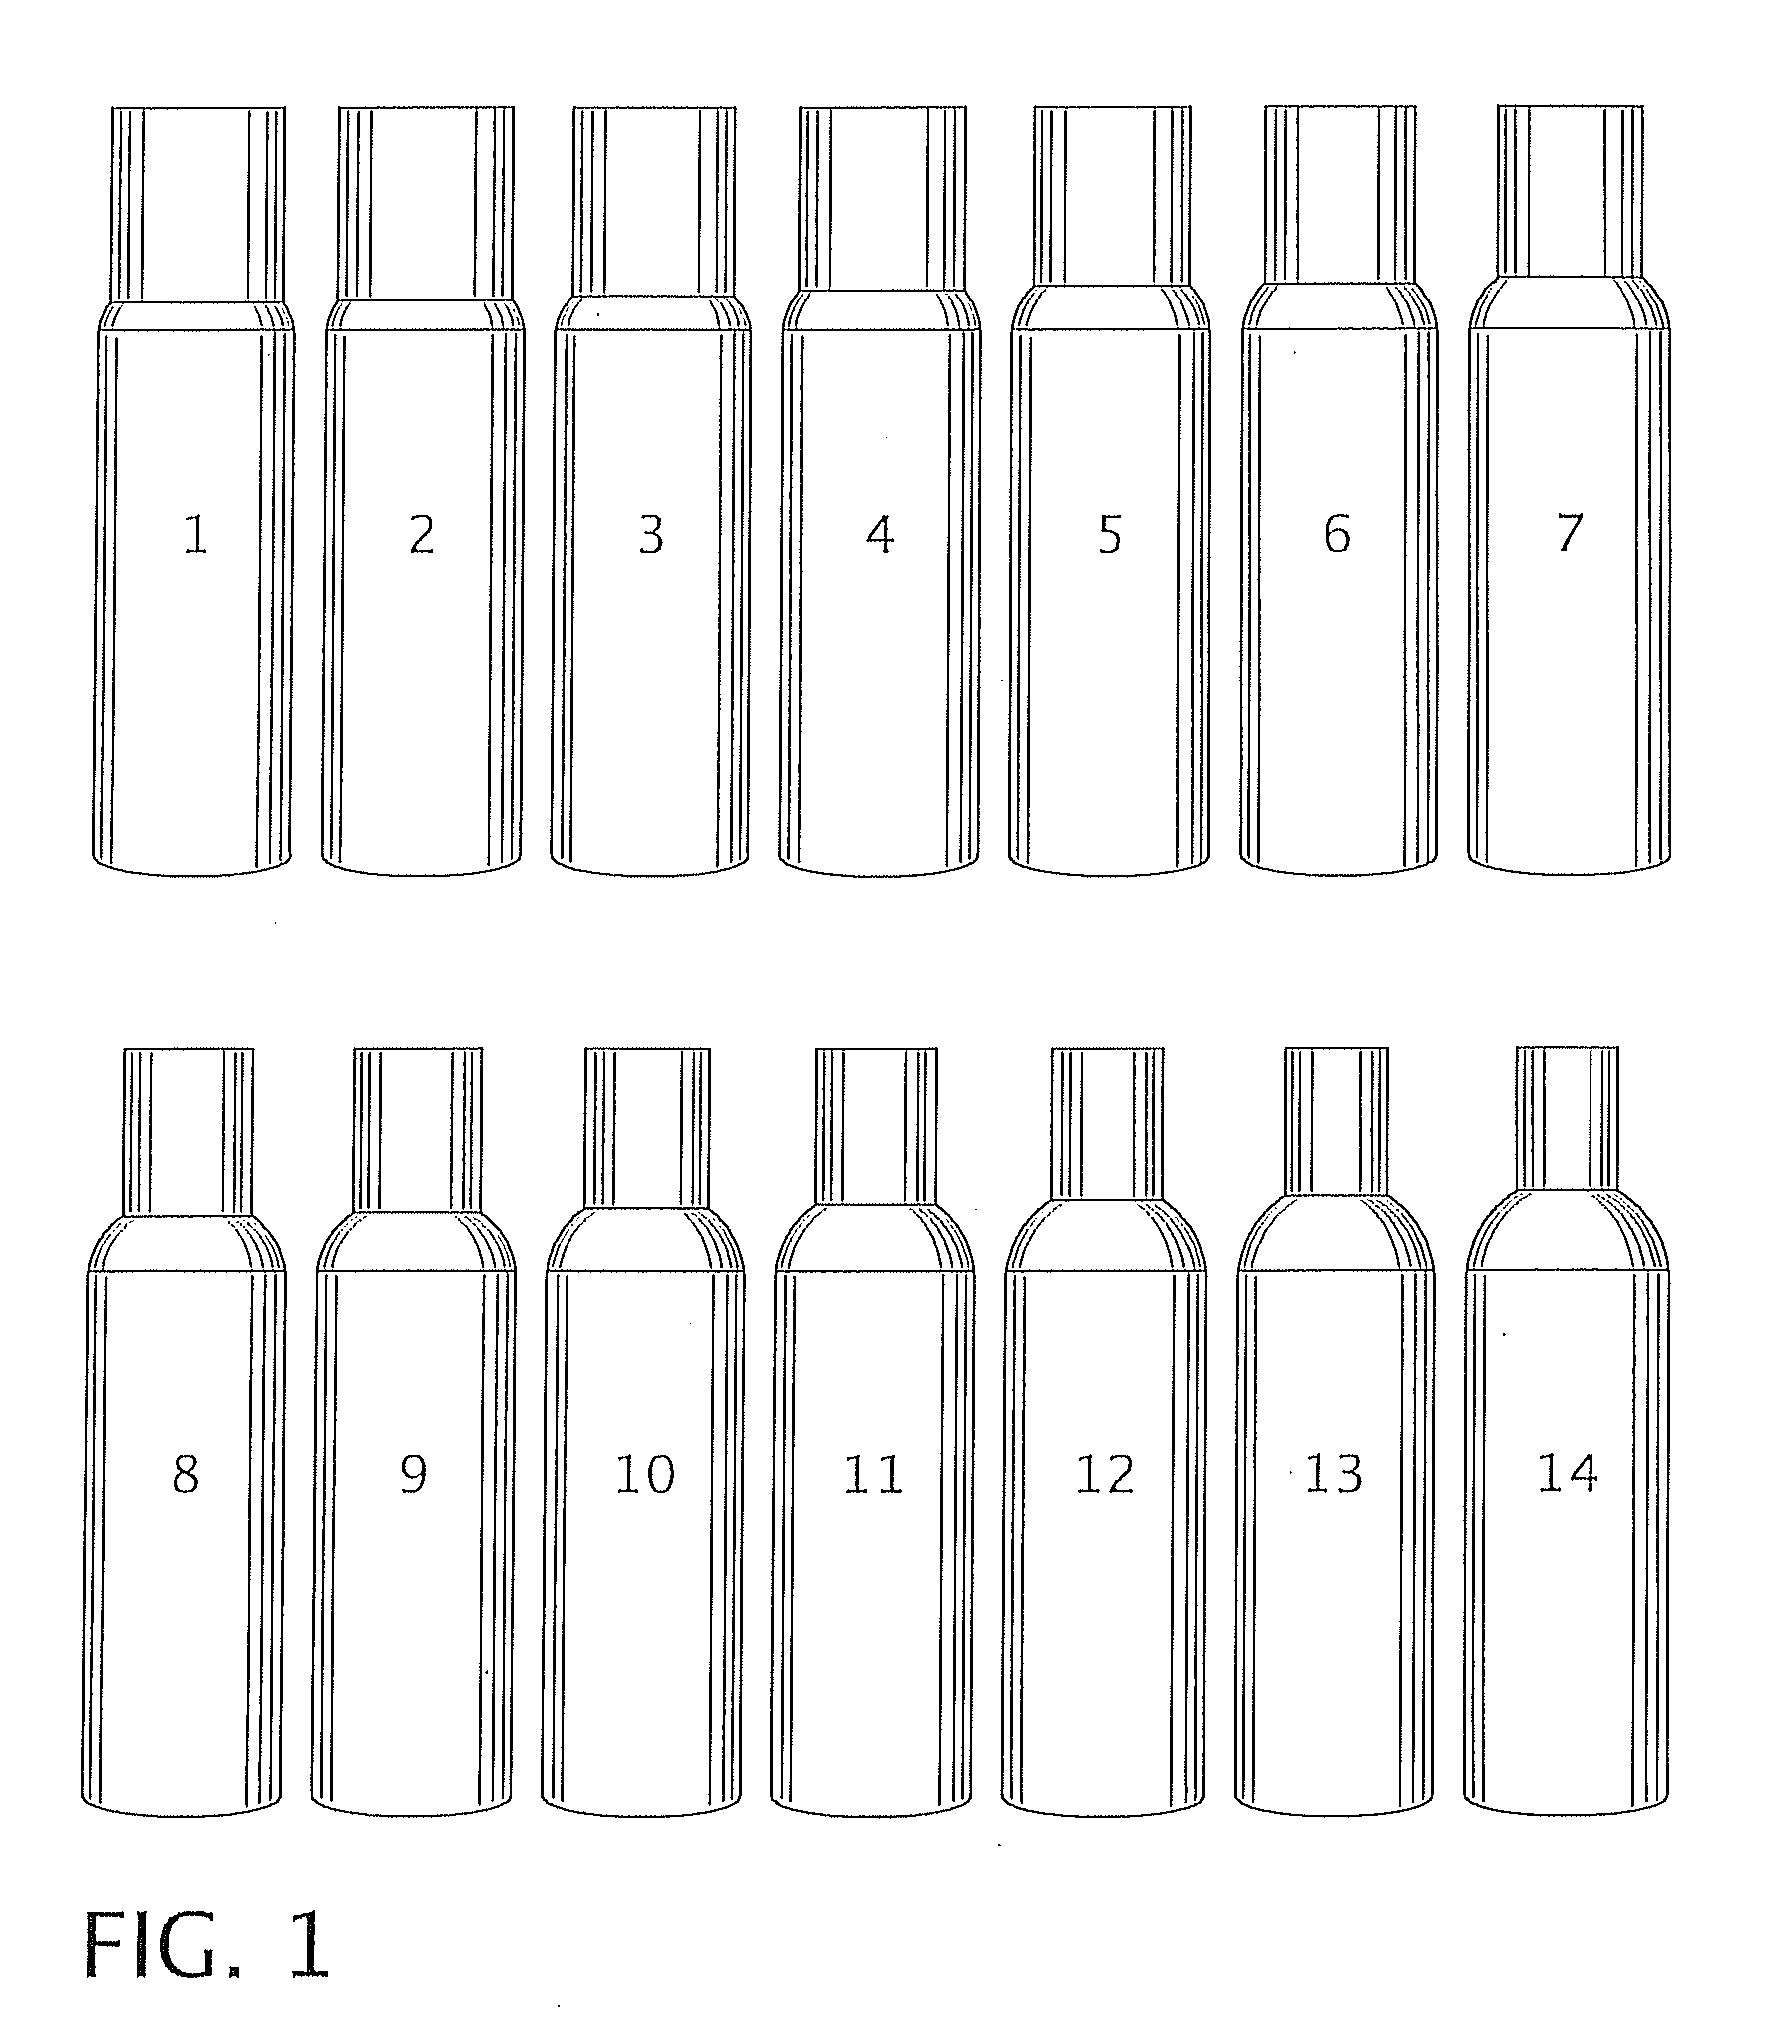 Manufacturing Process to Produce a Necked Container